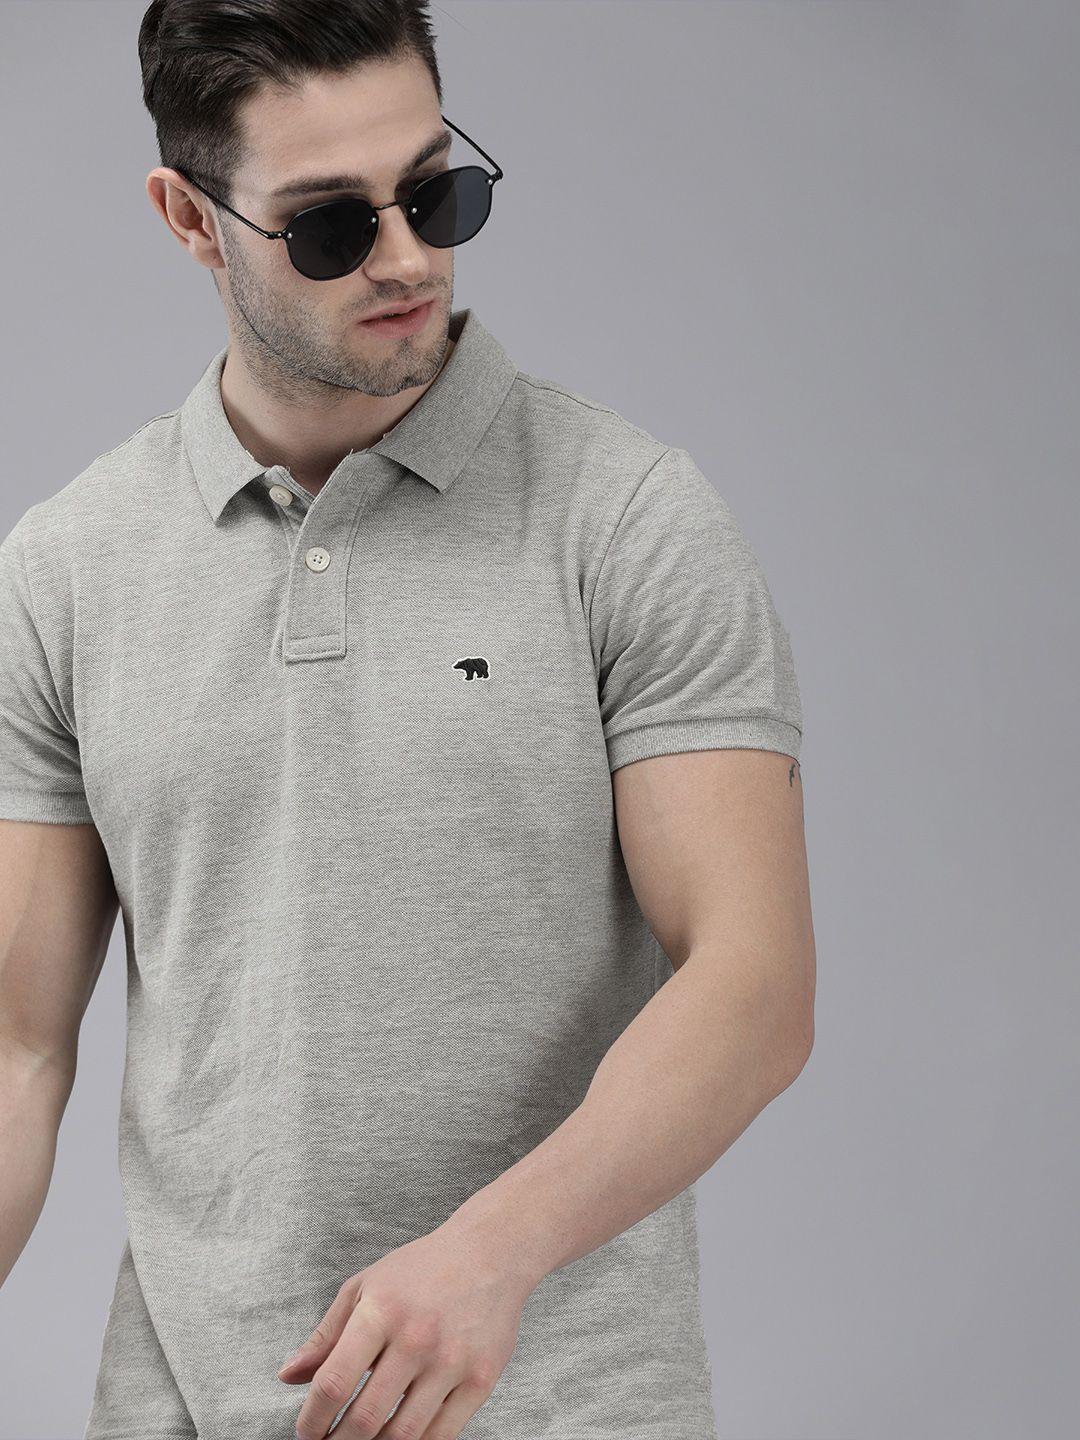 the-bear-house-men-grey-polo-collar-pure-cotton-slim-fit-t-shirt